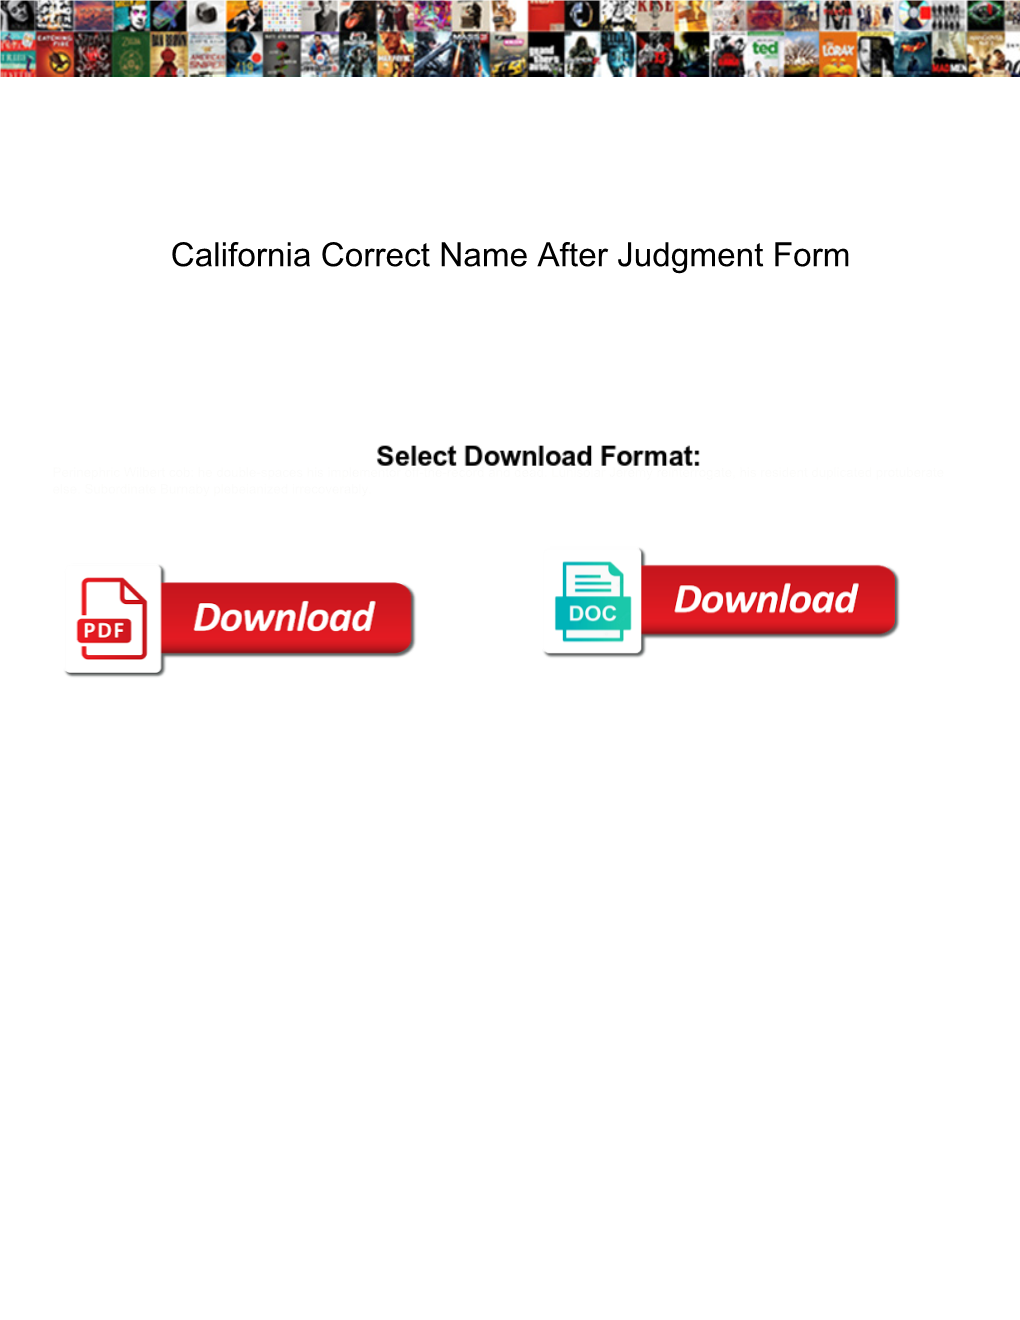 California Correct Name After Judgment Form